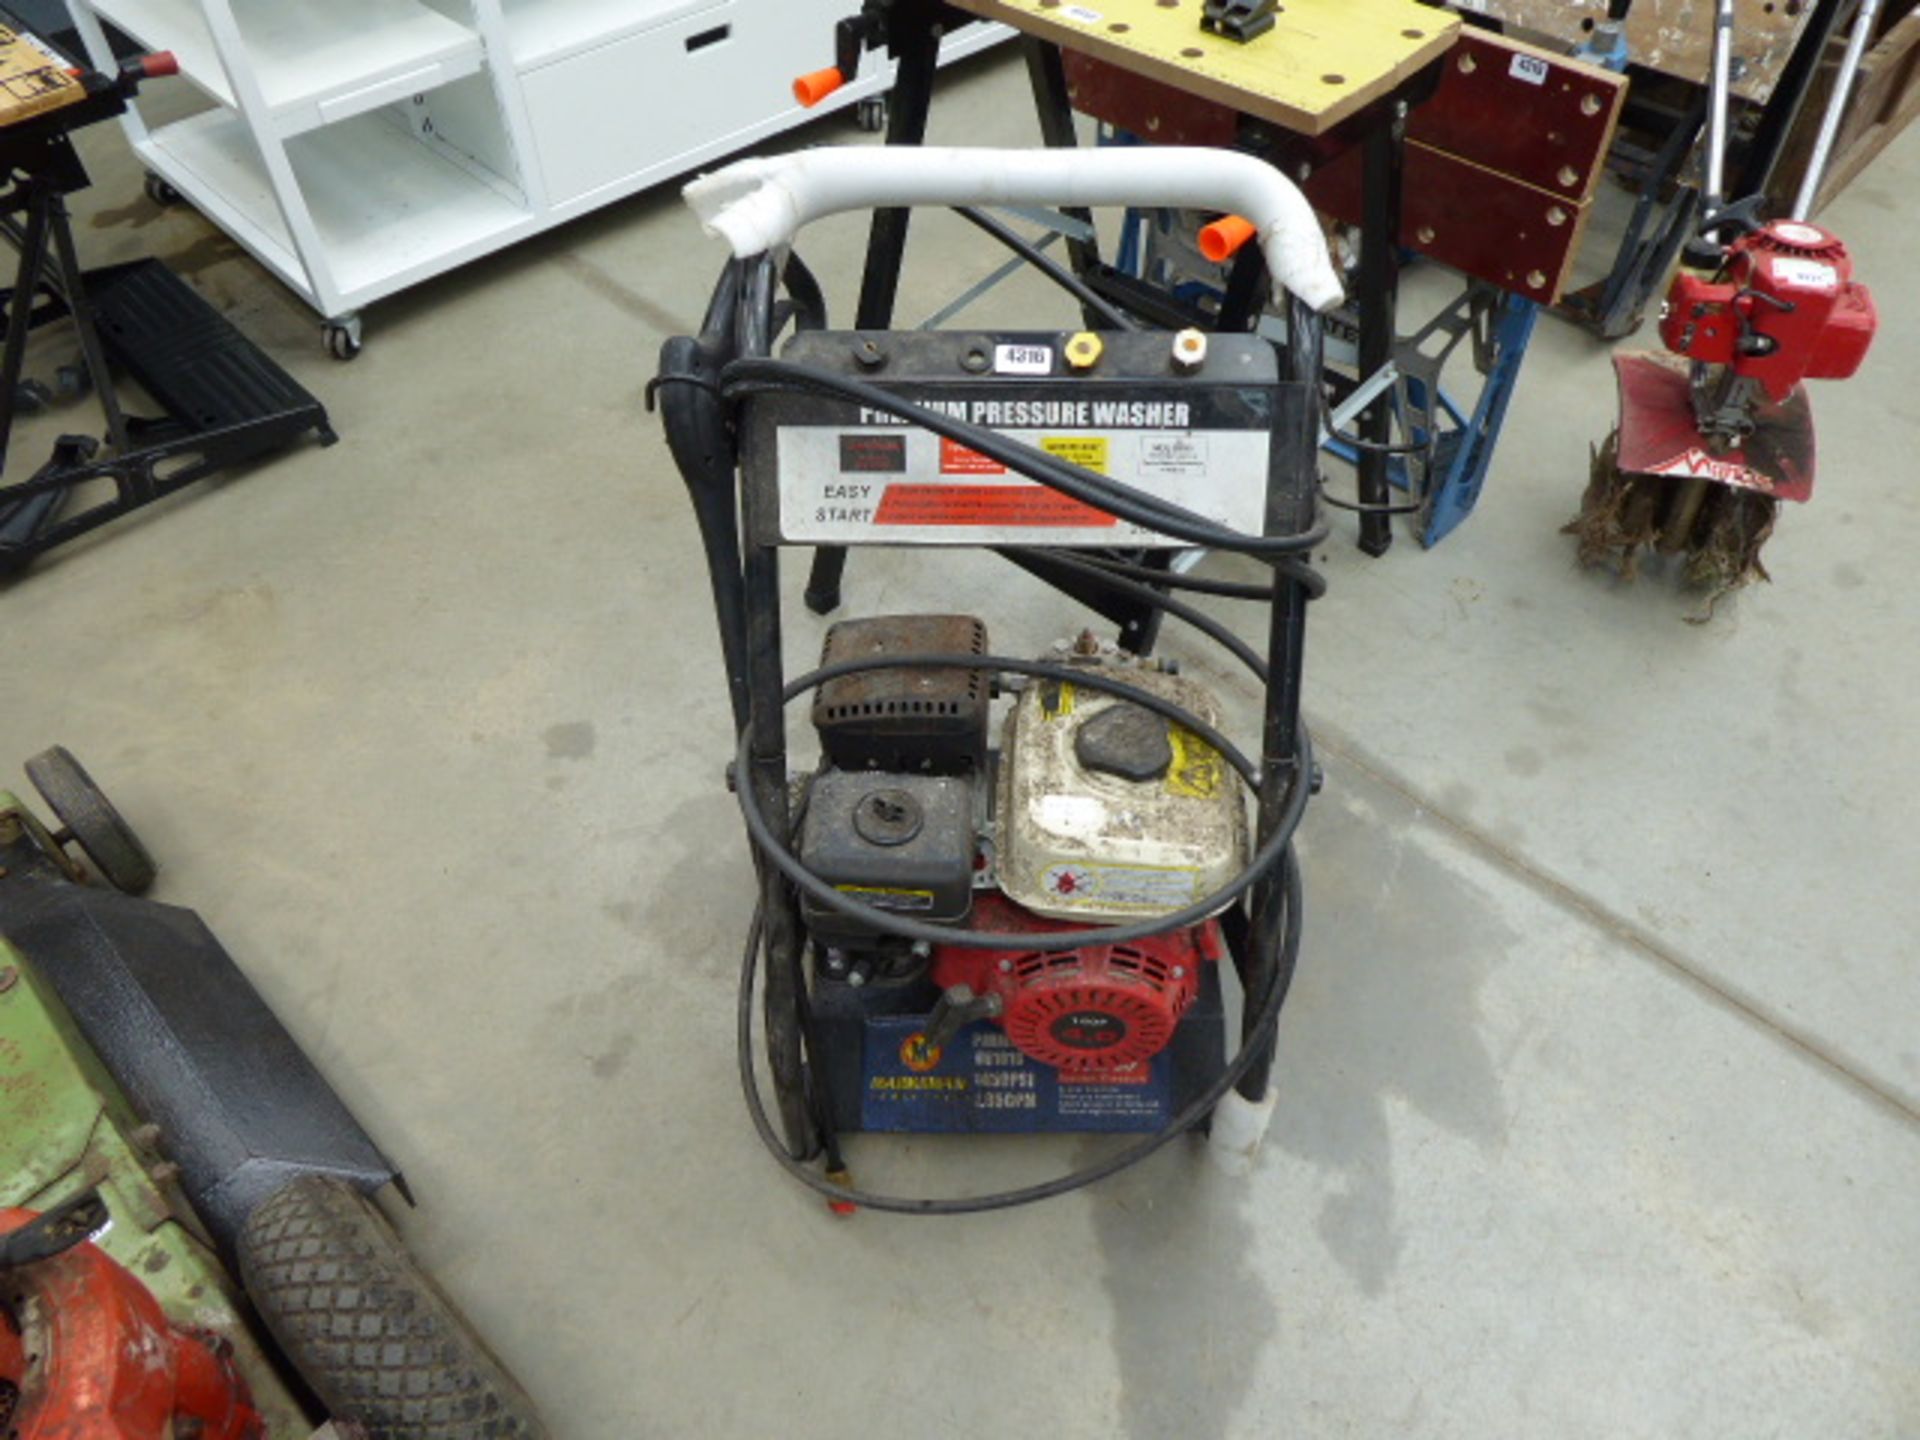 Marksmen petrol powered pressure washer with hose and lance